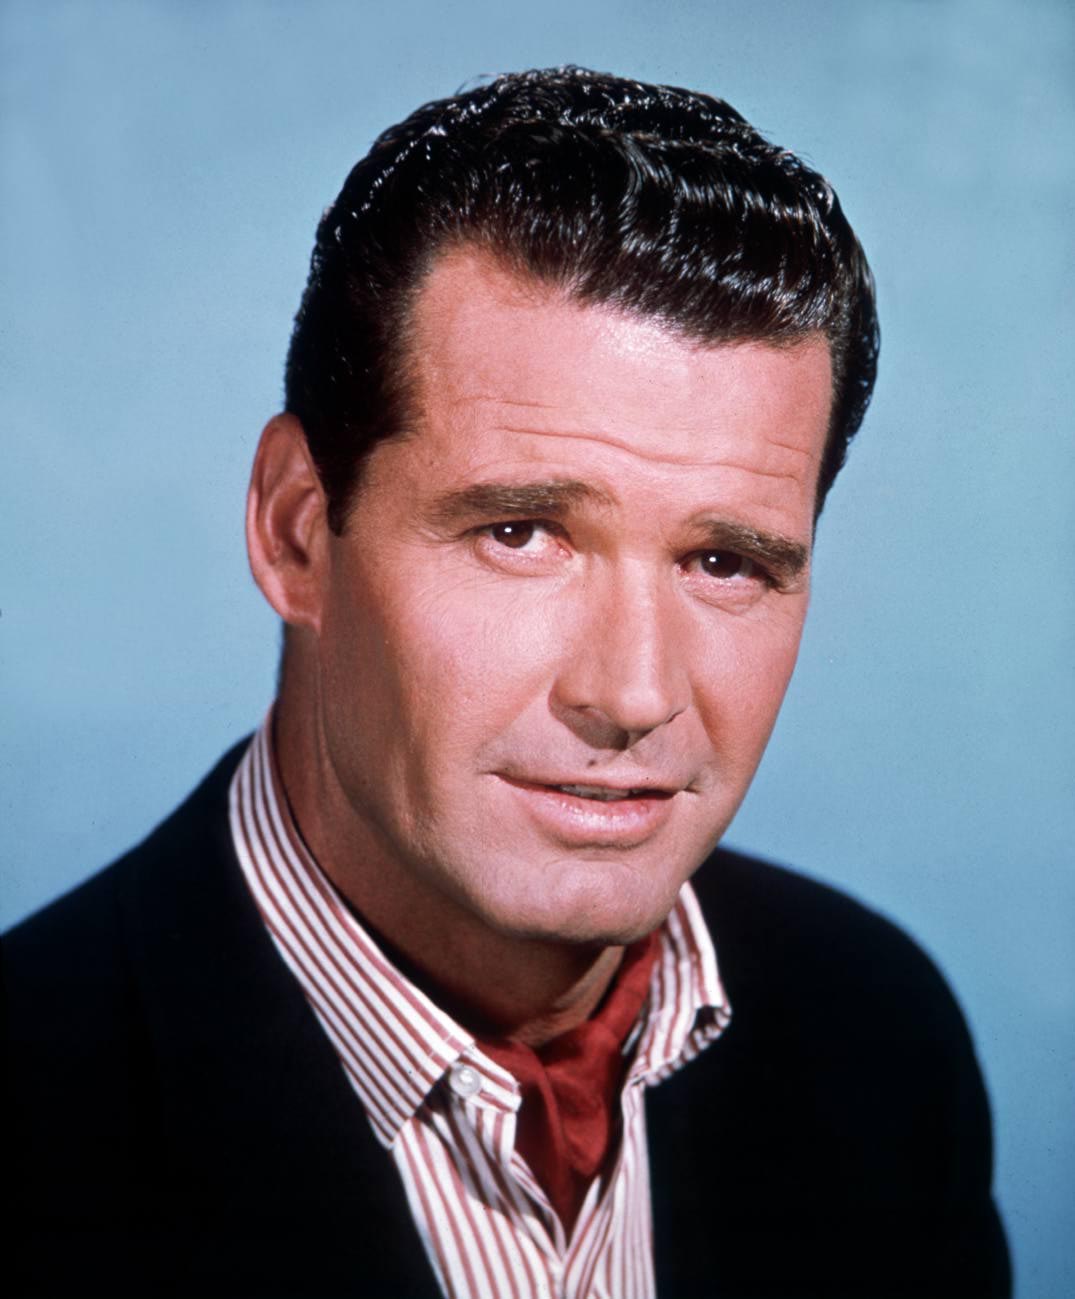 A headshot of TV legend James Garner wearing a black blazer with a white striped shirt on January 4, 1967 | Source: Getty Images